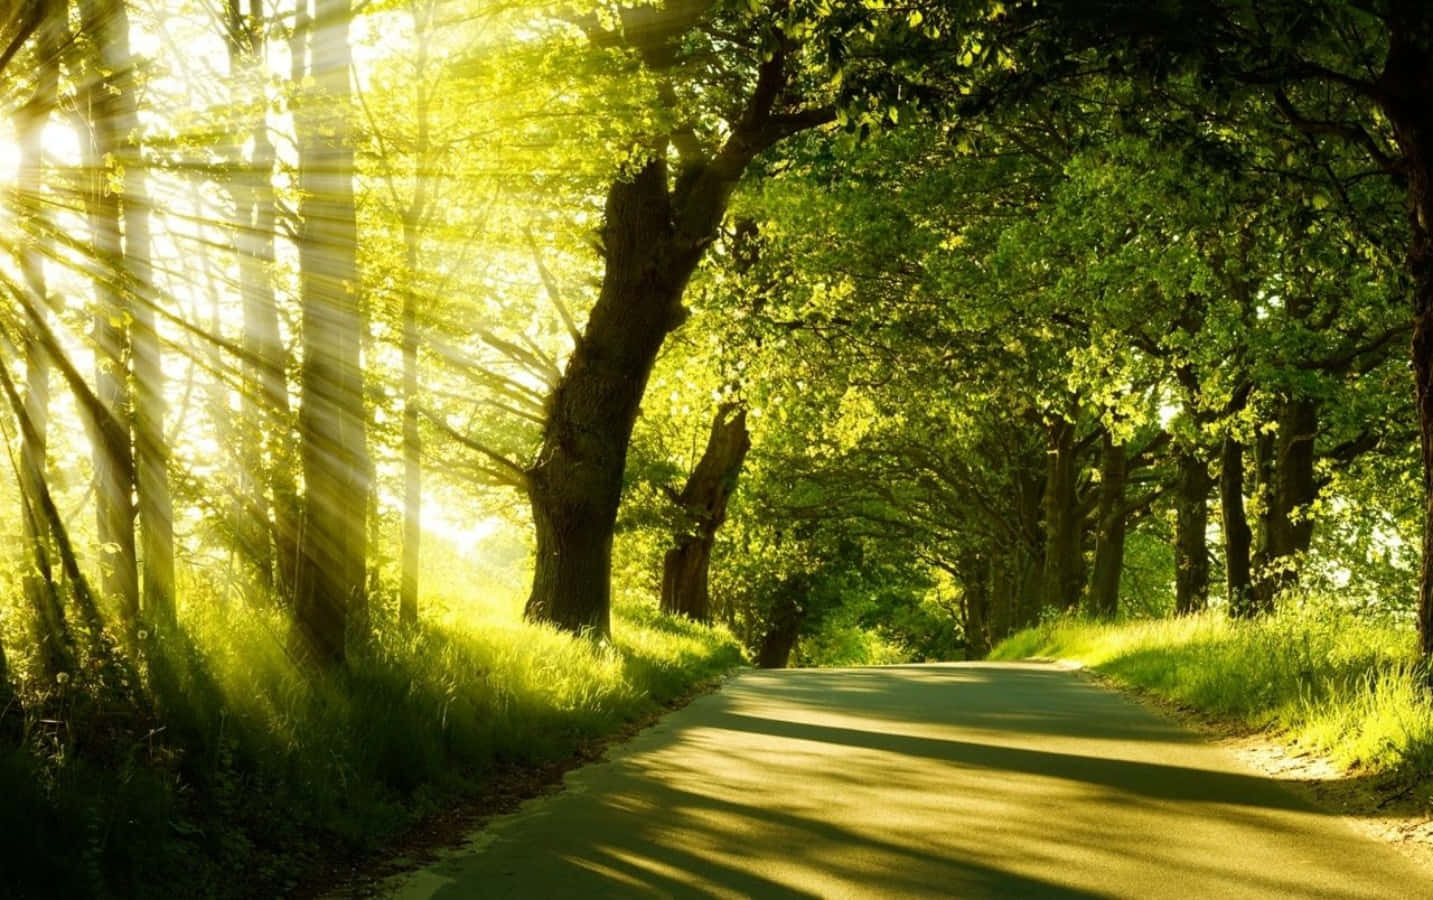 Sunny Day Scenery Woods Peaceful Background